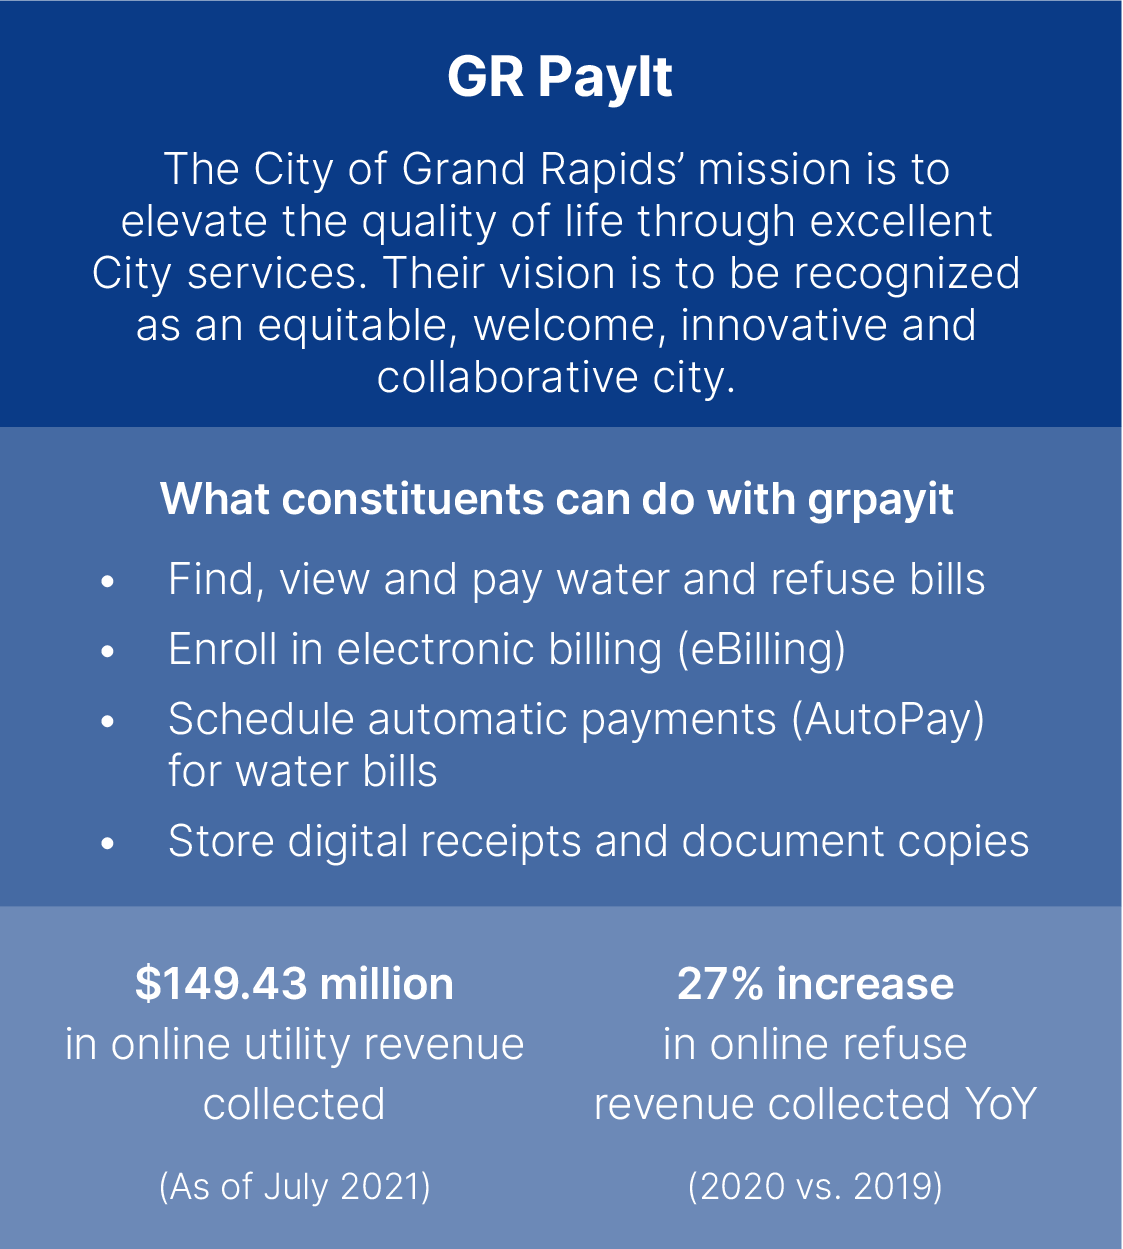 Infographic on GR PayIt objectives and achievements